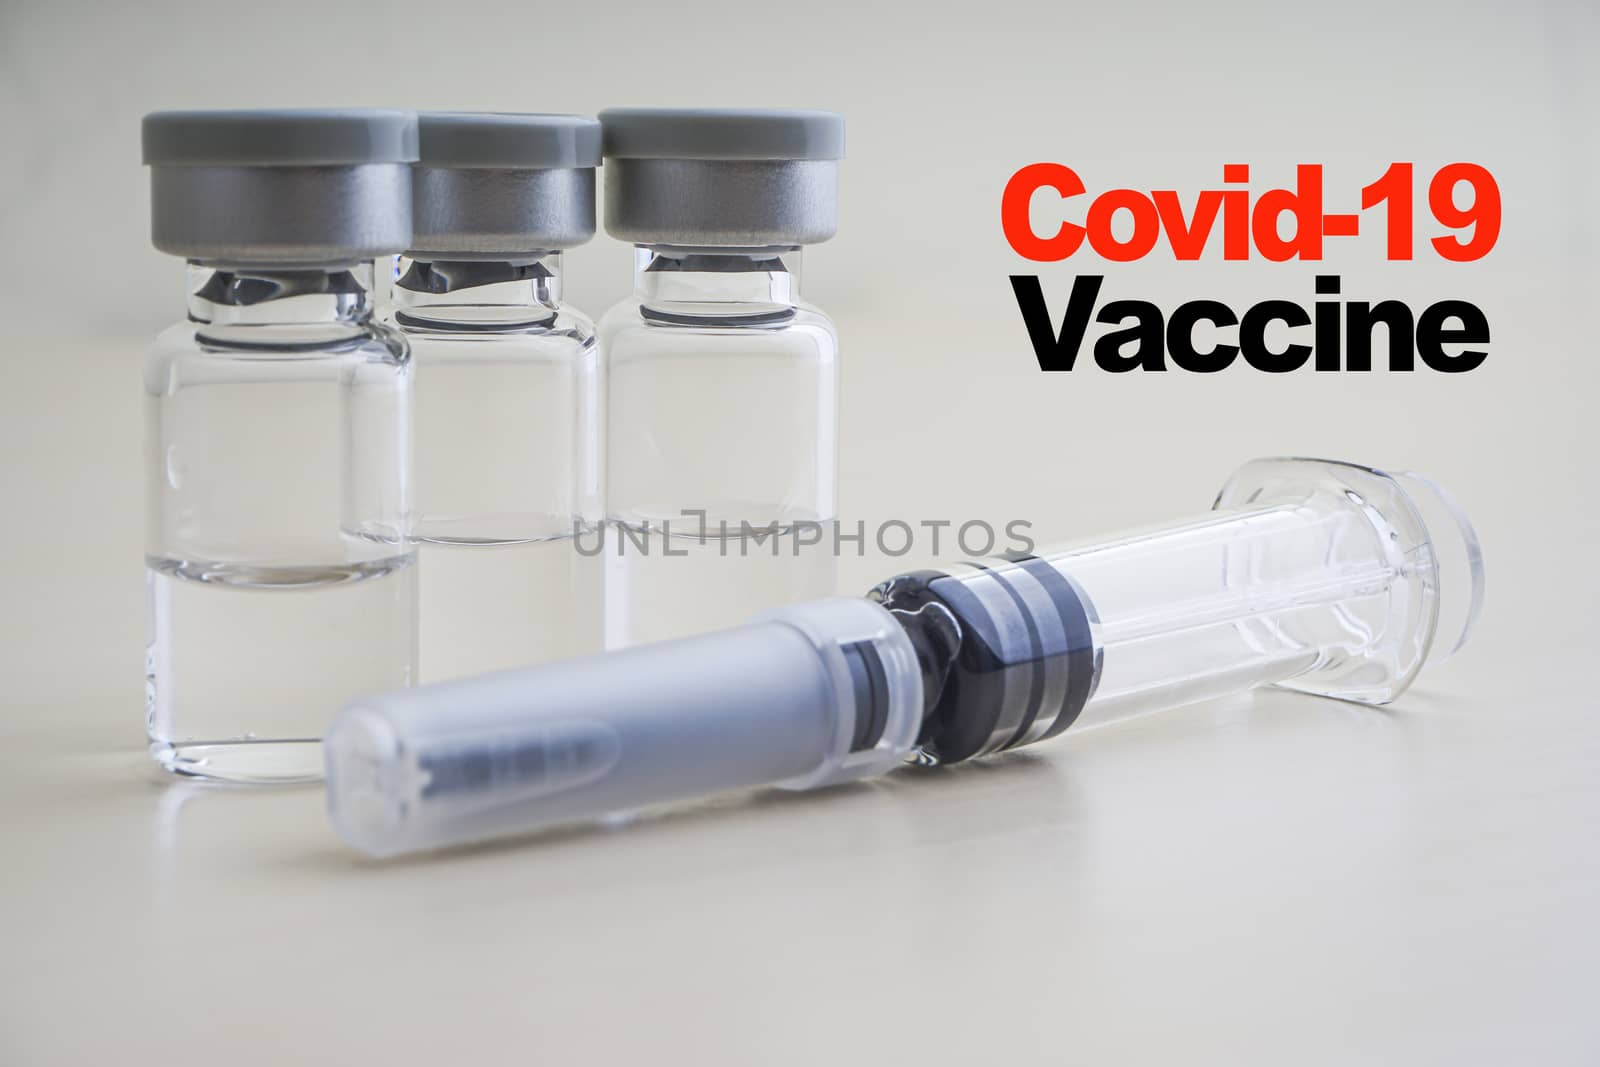 COVID -19 VACCINE text with Syringe and vials on wooden background by silverwings